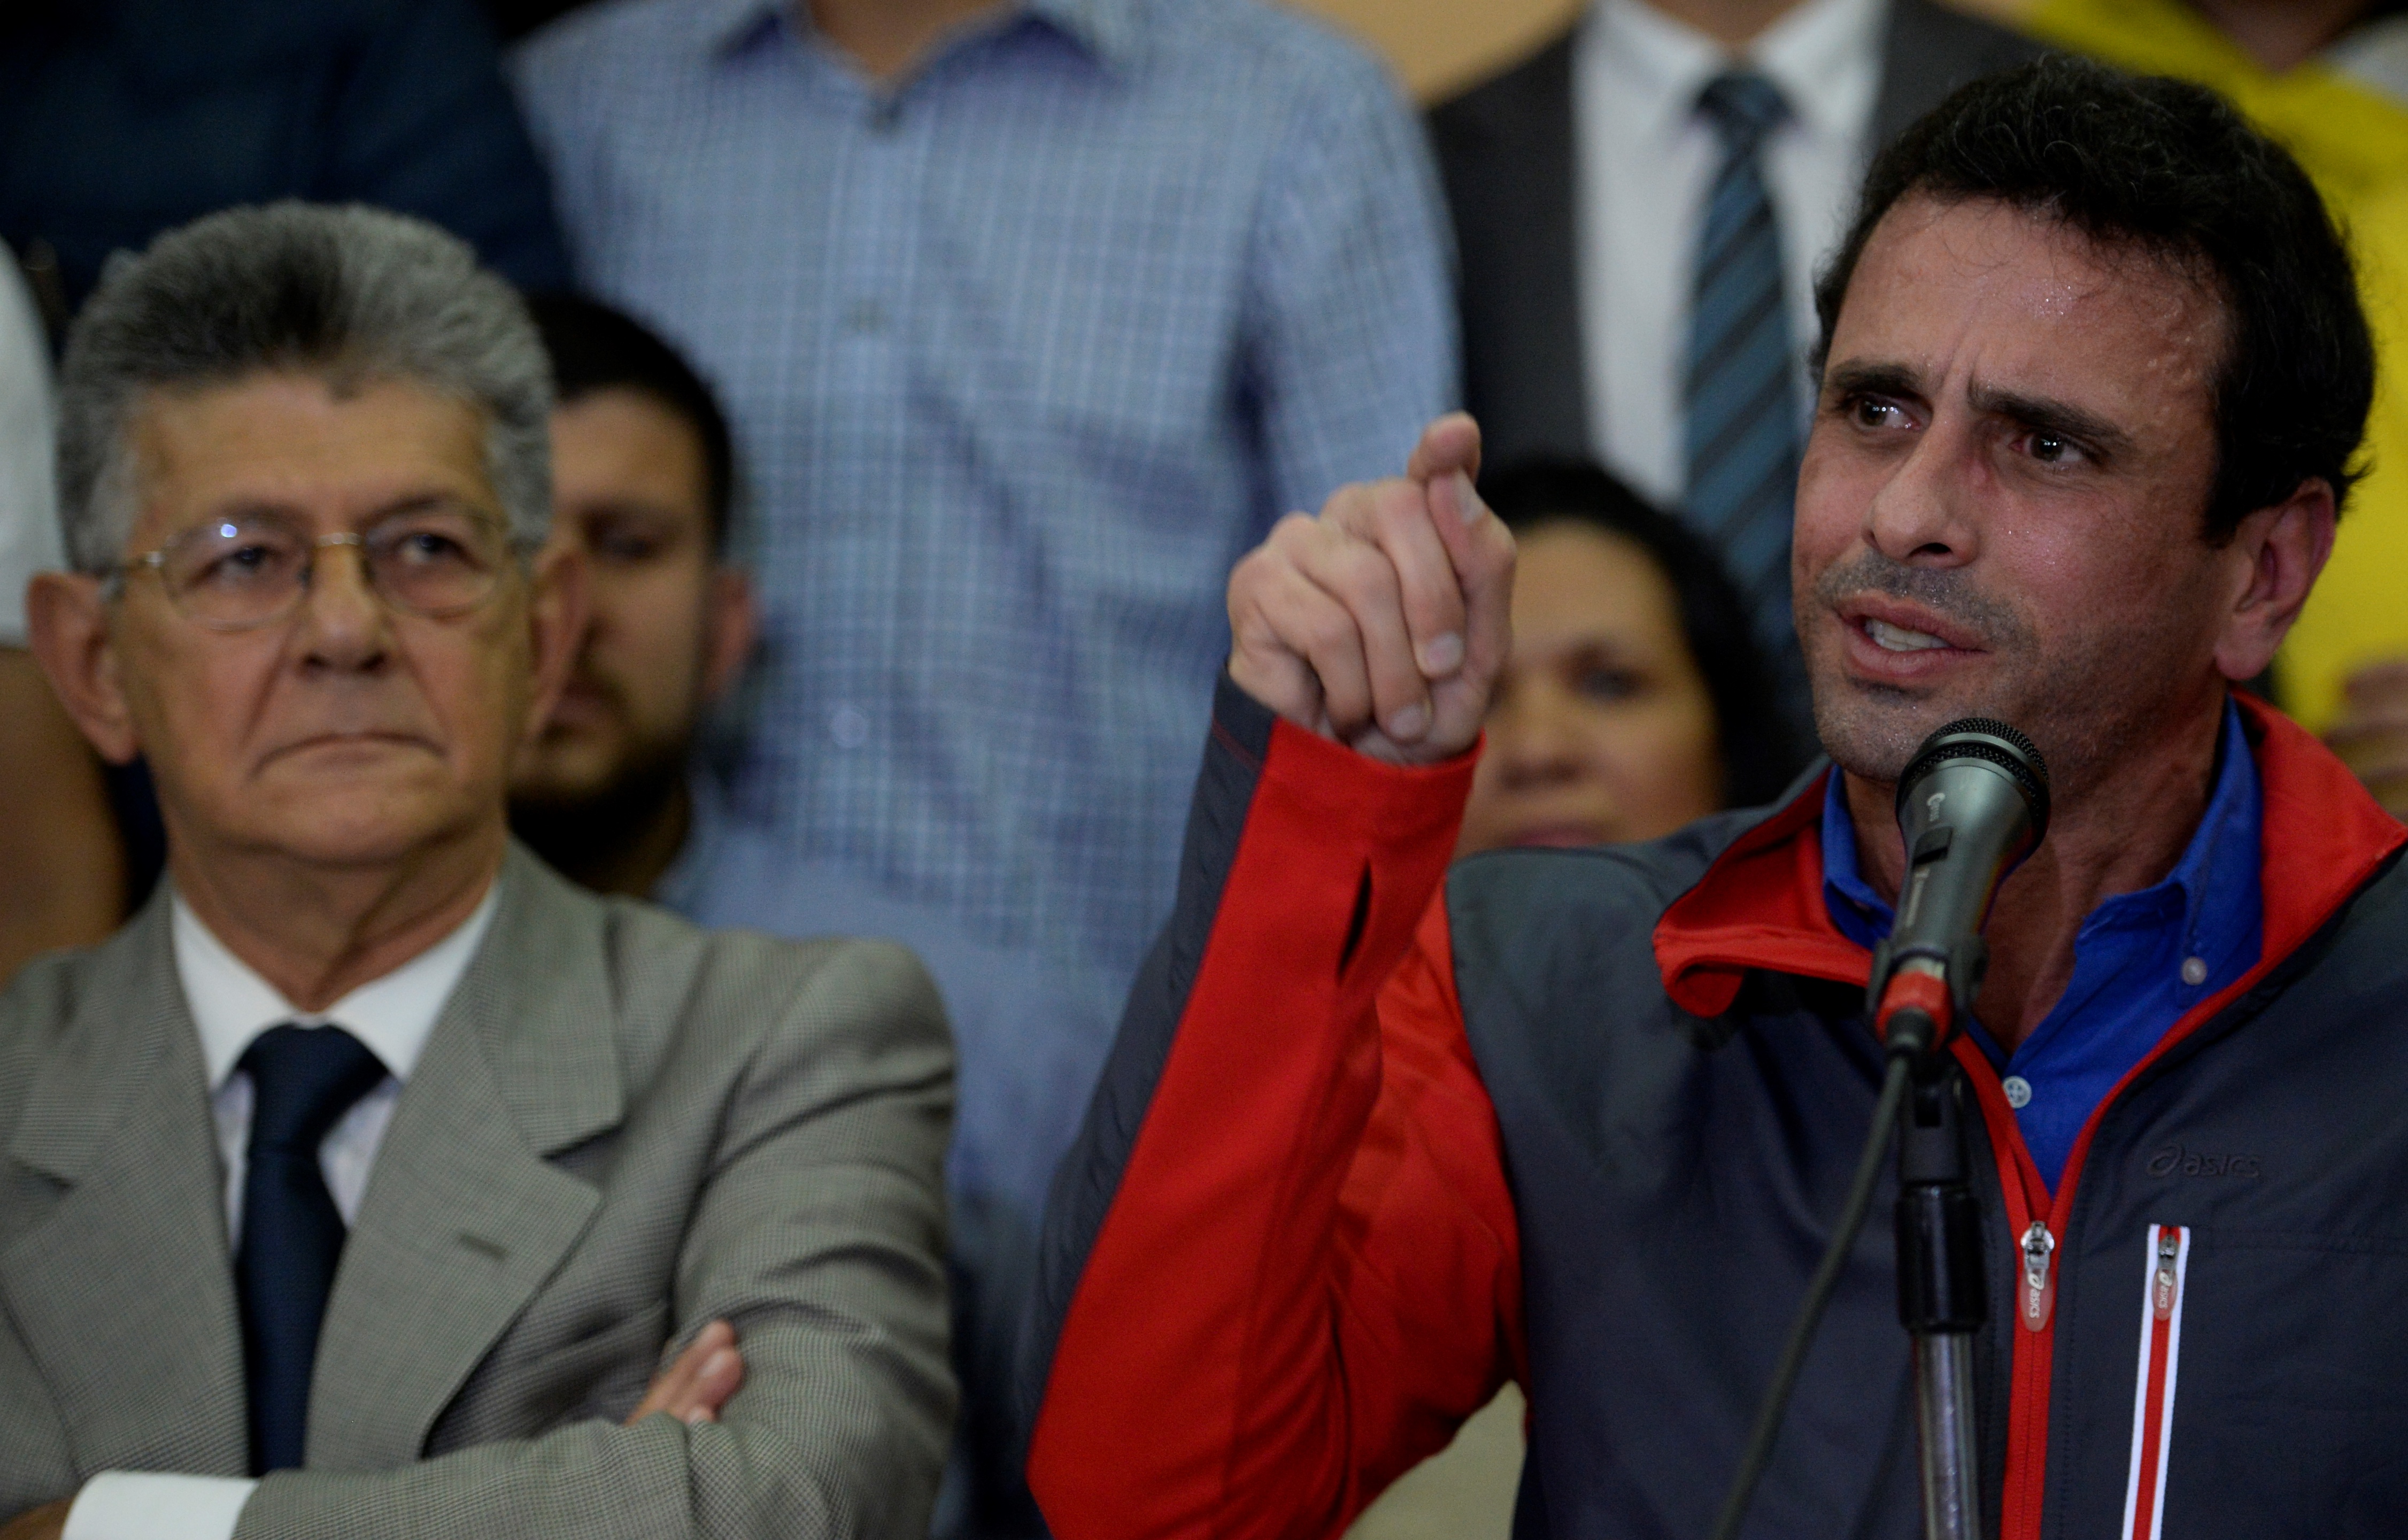 Venezuelan opposition leader Henrique Capriles speaks next to the president of the National Assembly, Henry Ramos Allup, during a press conference in Caracas on October 21, 2016. A furious Venezuelan opposition Friday vowed mass protests, accusing the Socialist government of staging a coup by blocking its drive for a recall referendum against President Nicolas Maduro. / AFP PHOTO / Federico PARRA